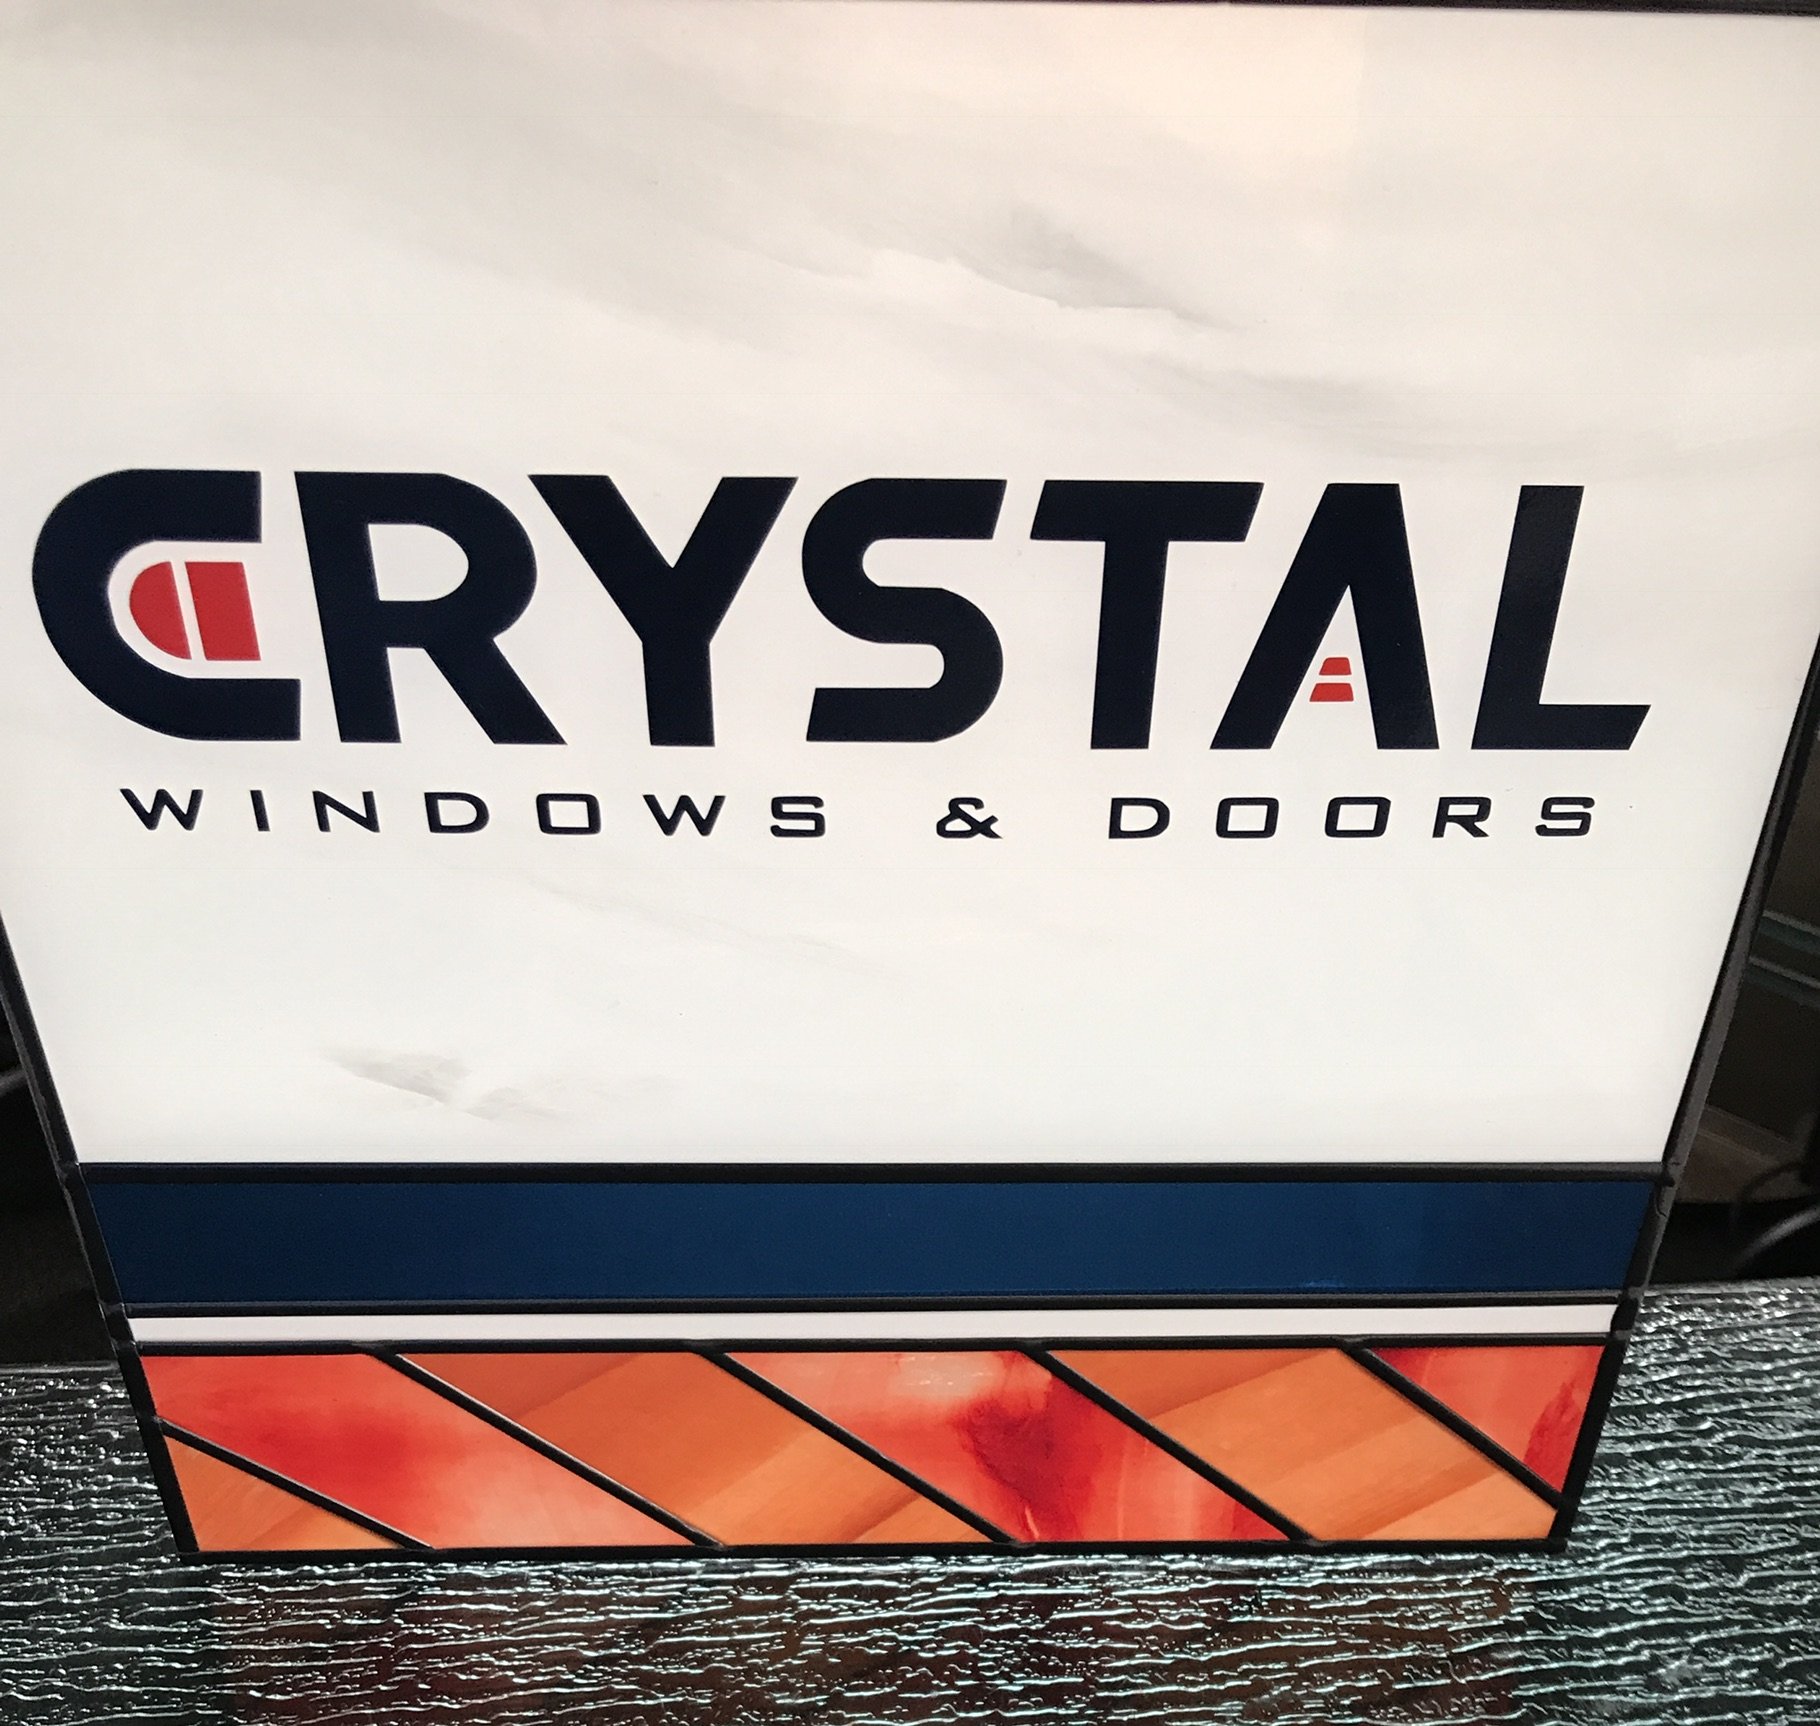  Square panel with company logo Crystal Windows &amp; Doors with company colors, oranges and reds 